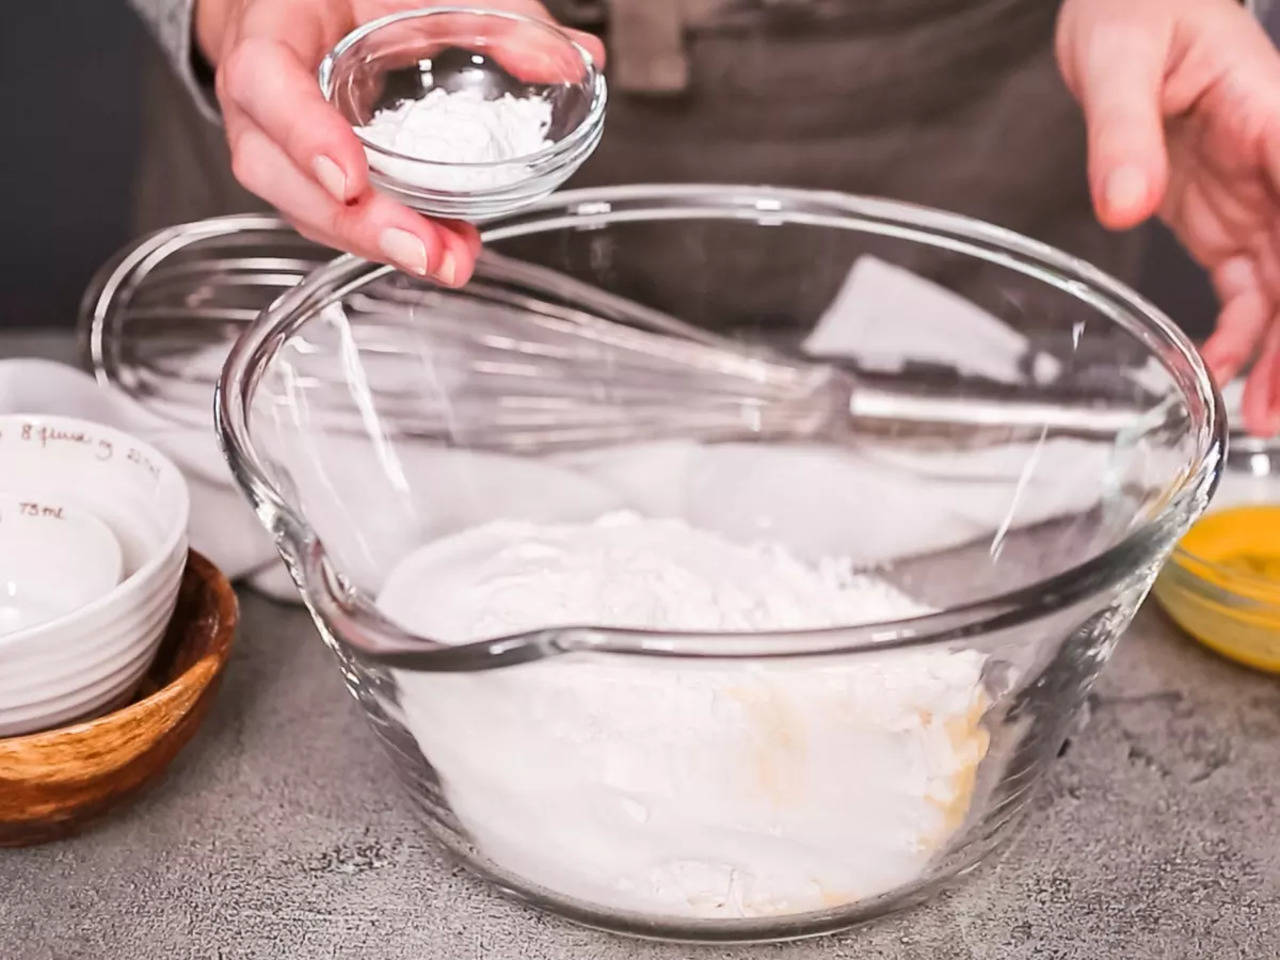 Cook's Country - Baking Soda vs. Baking Powder: Do you know the difference?  Make our Lemon Buttermilk Sheet Cake recipe: https://cooks.io/3omAmVS |  Facebook